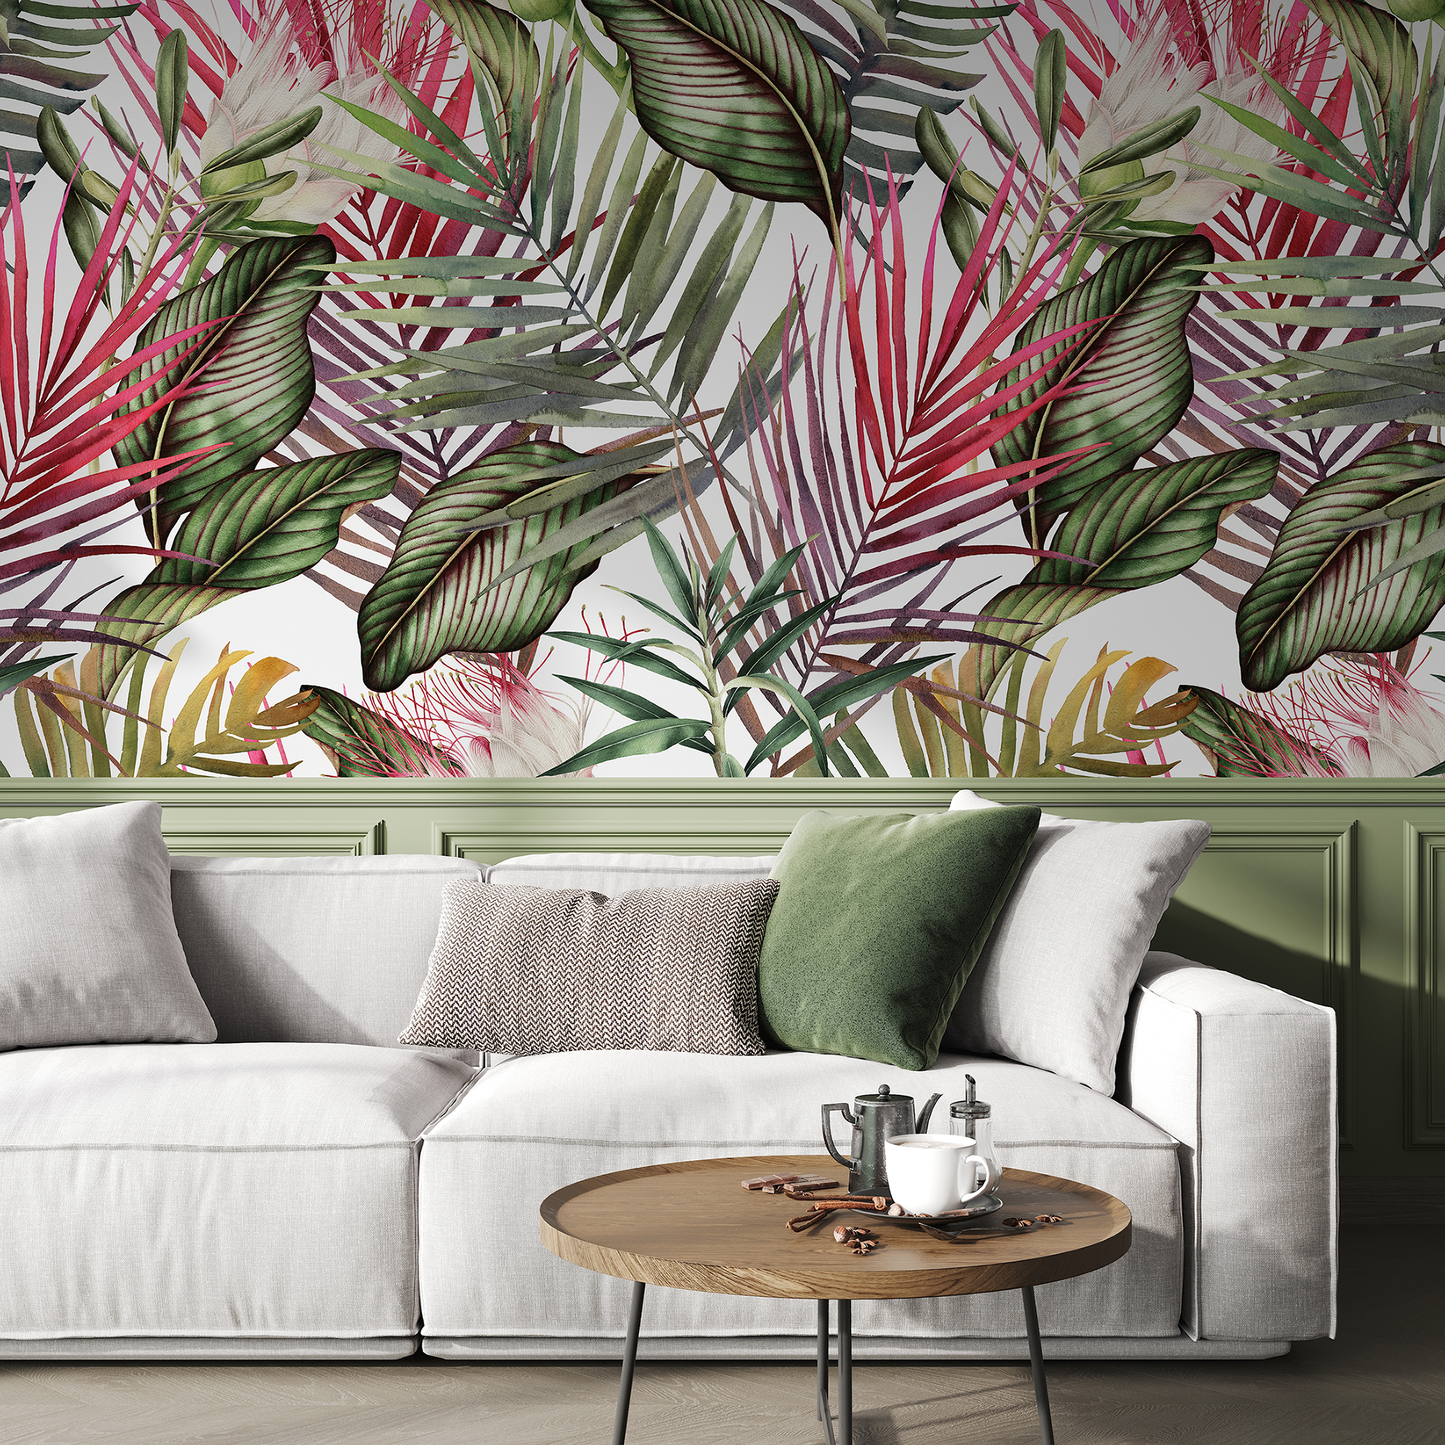 Removable Wallpaper Peel and Stick Wallpaper Wall Paper Wall Mural - Colorful Tropical Leaves Wallpaper - A444